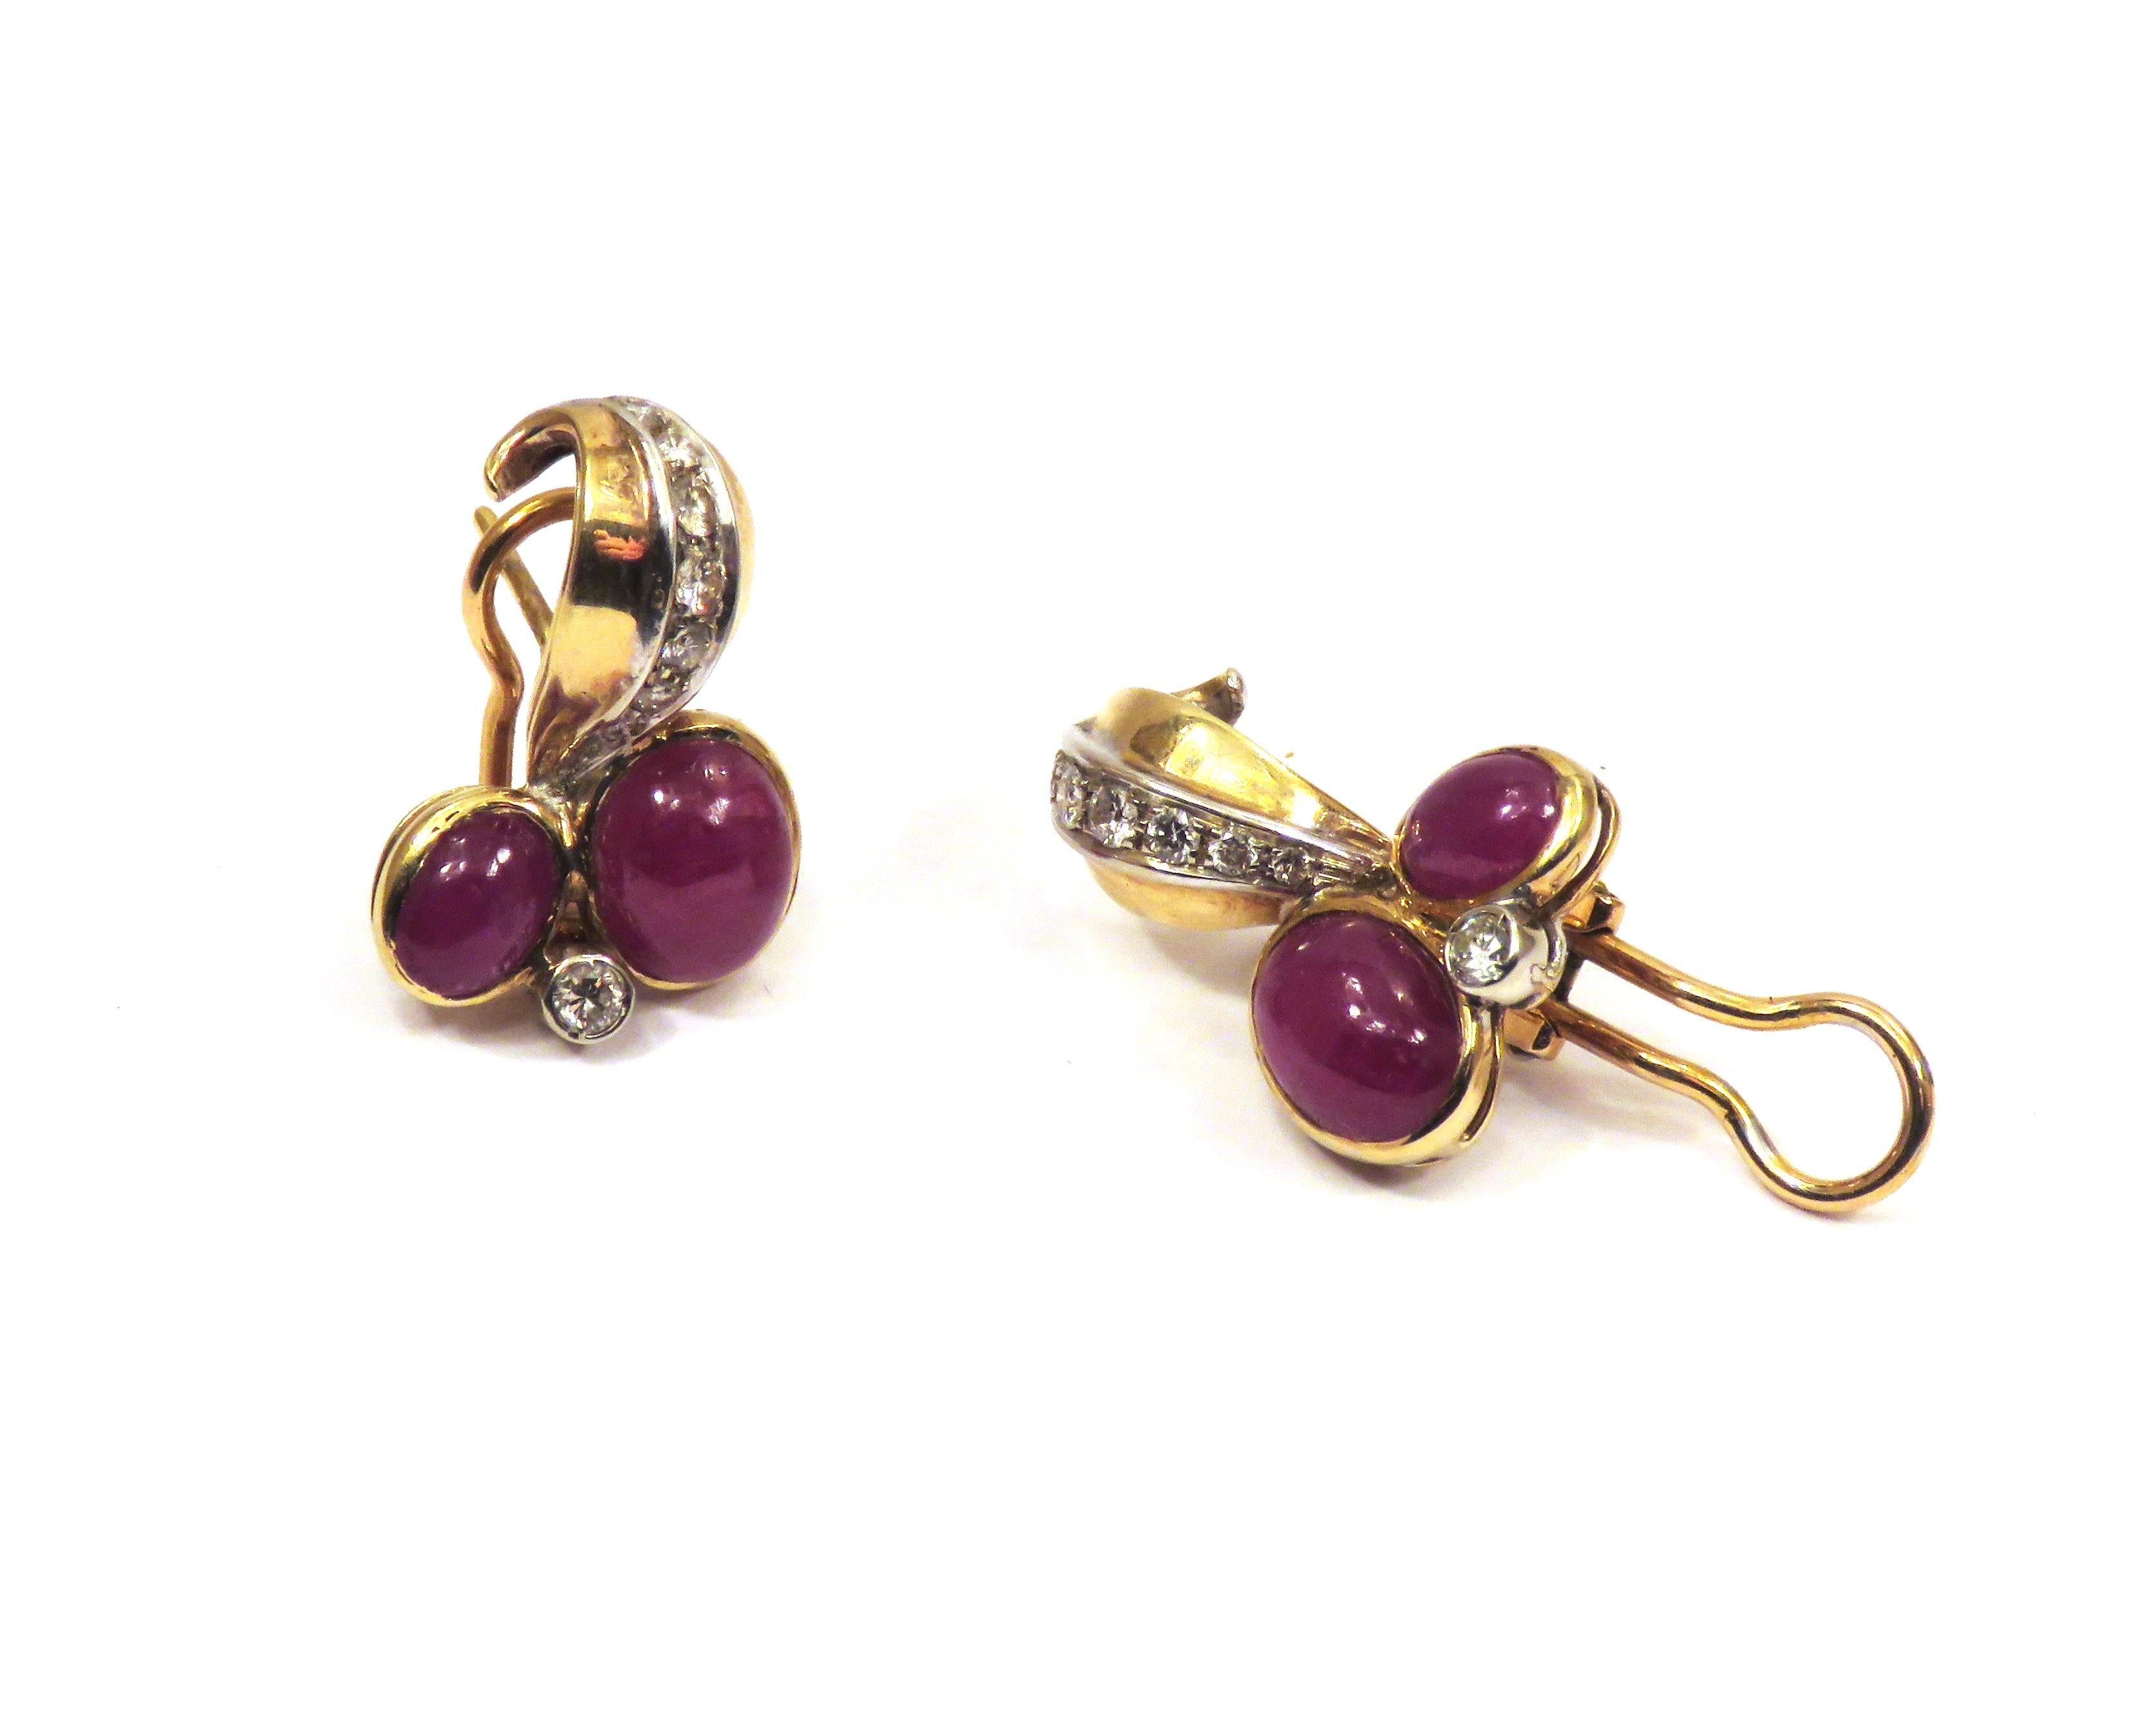 Retro Rubies Diamonds 18 Karat Yellow Gold Clip-On Earrings Handcrafted in Italy